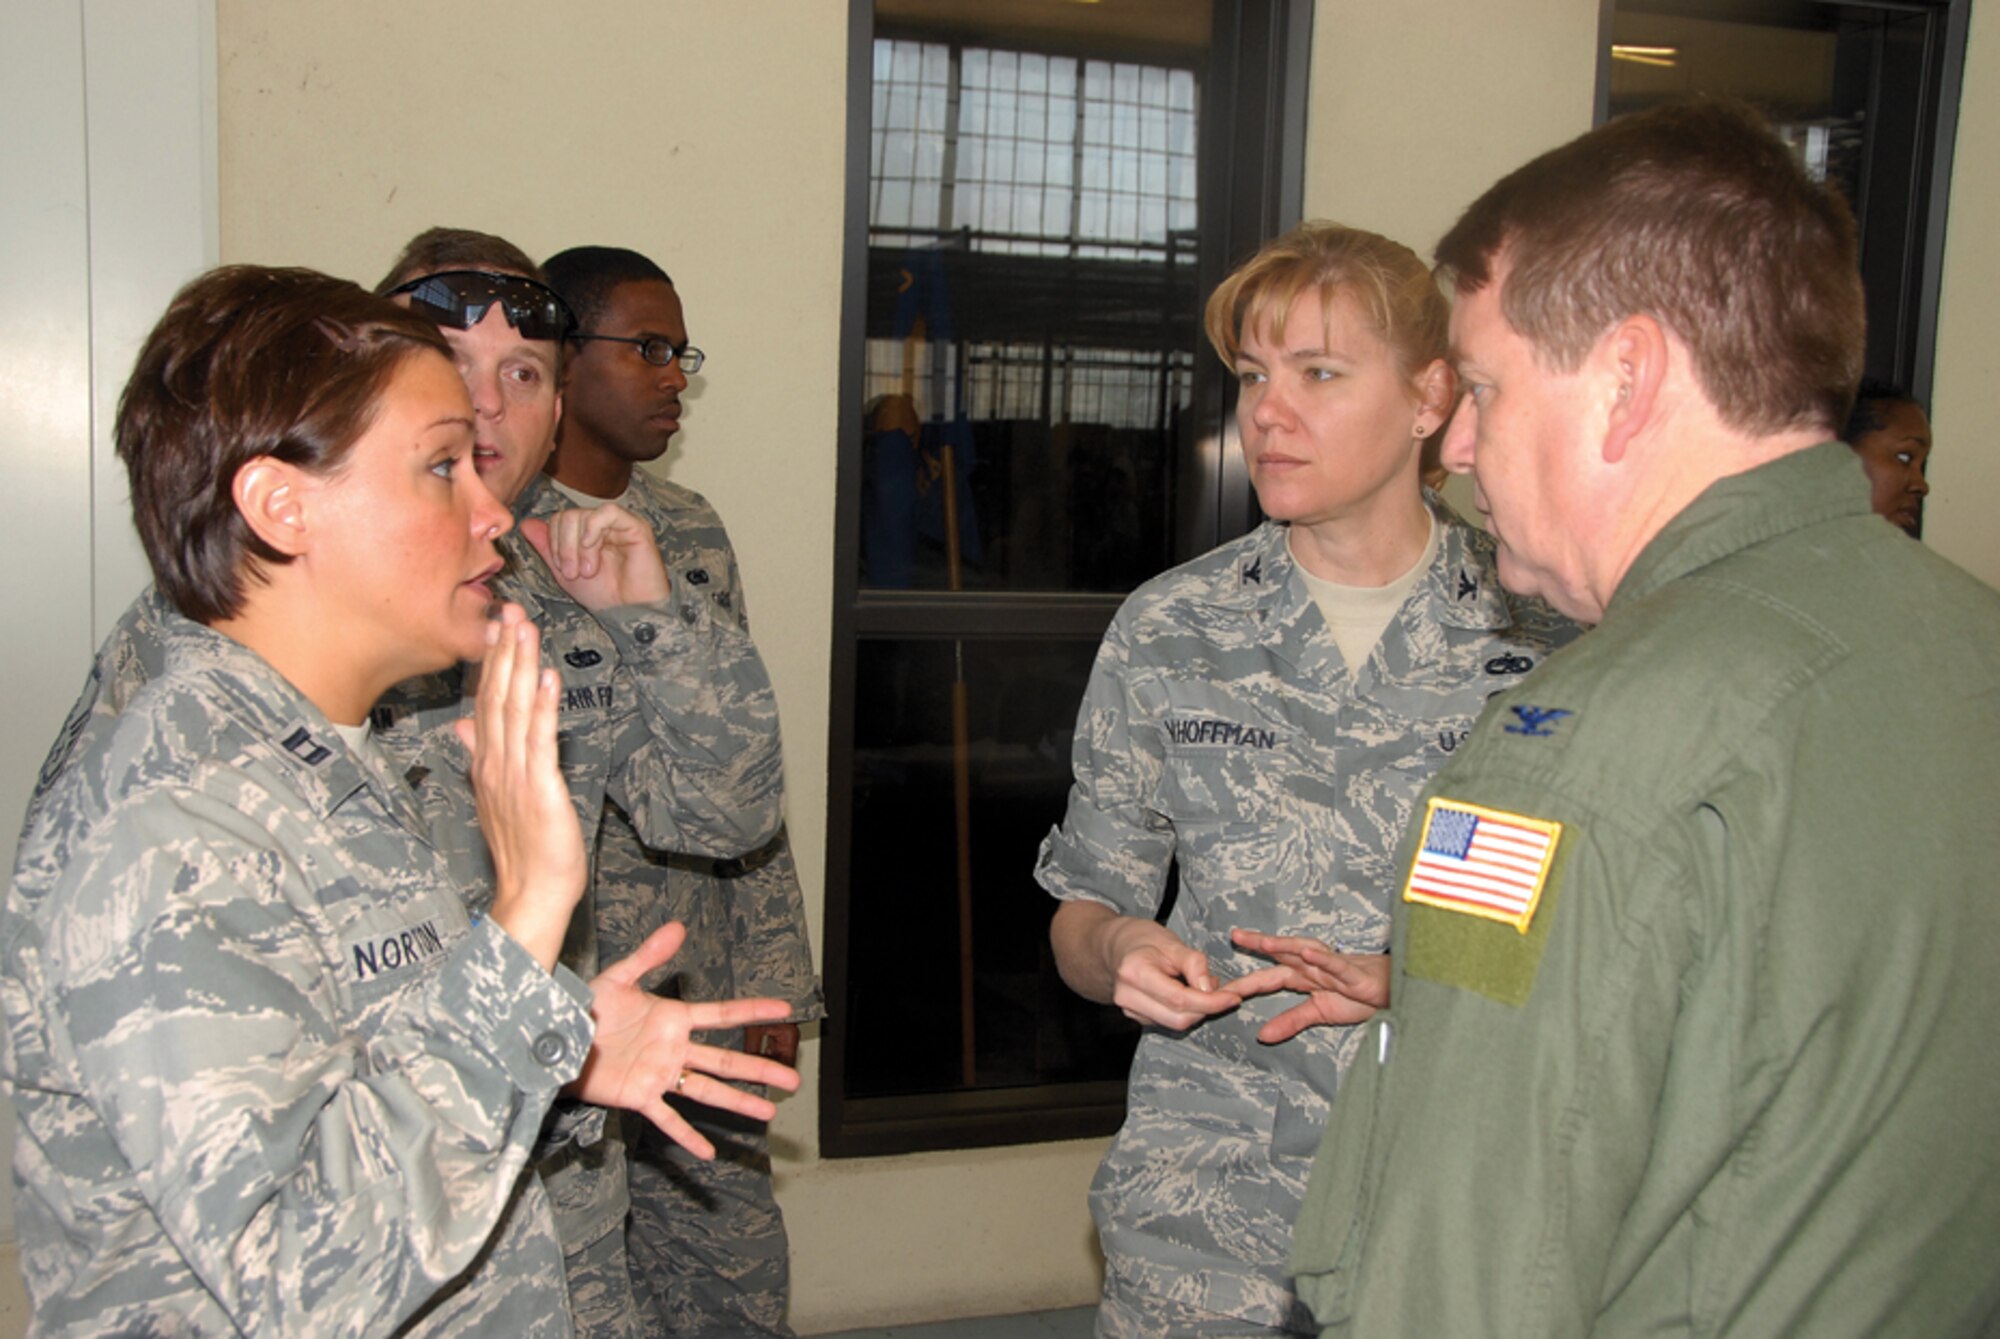 Then-Capt. Norton, left, working in LDRS, was a major force in getting the personnel and equipment of the 908th out the door during the 2010 AEF deployment.